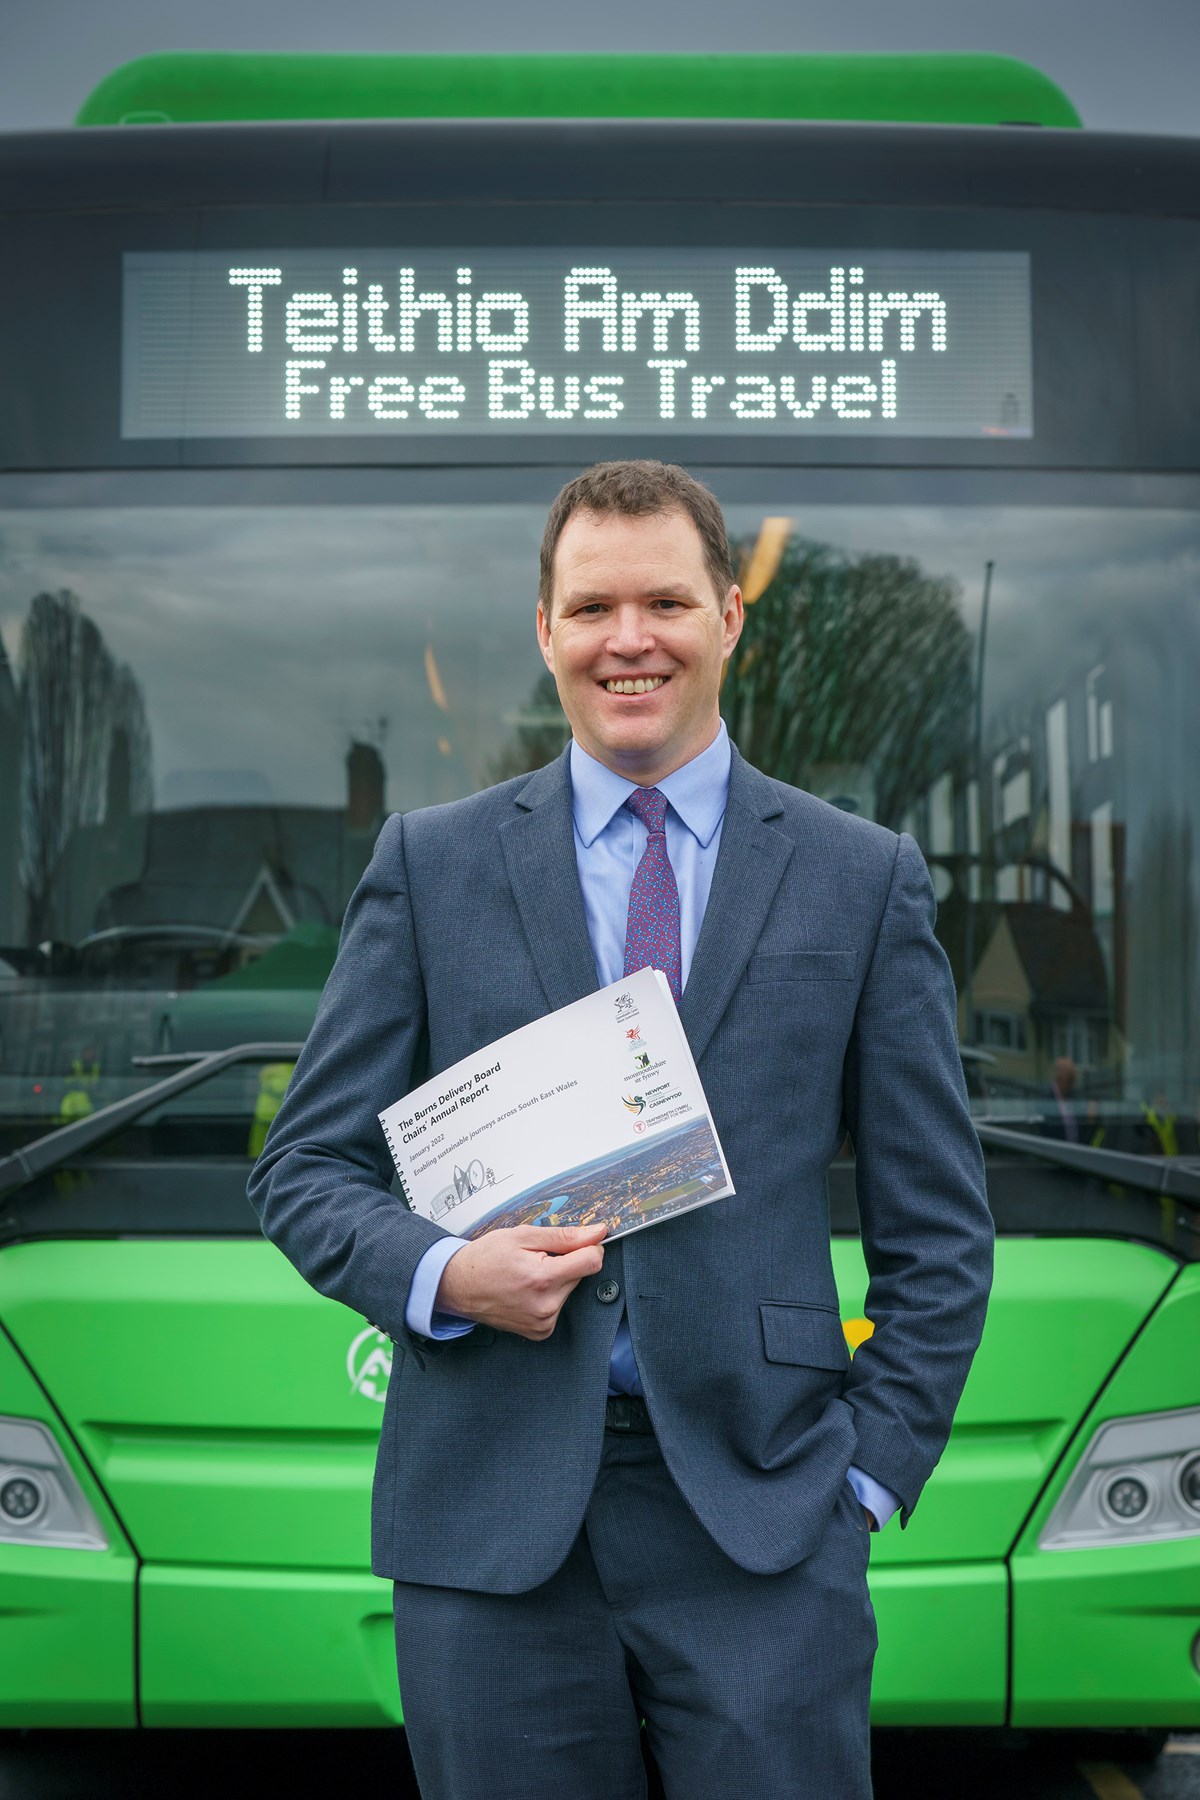 Newport Free bus travel - Deputy Minister for Climate Change, Lee Waters